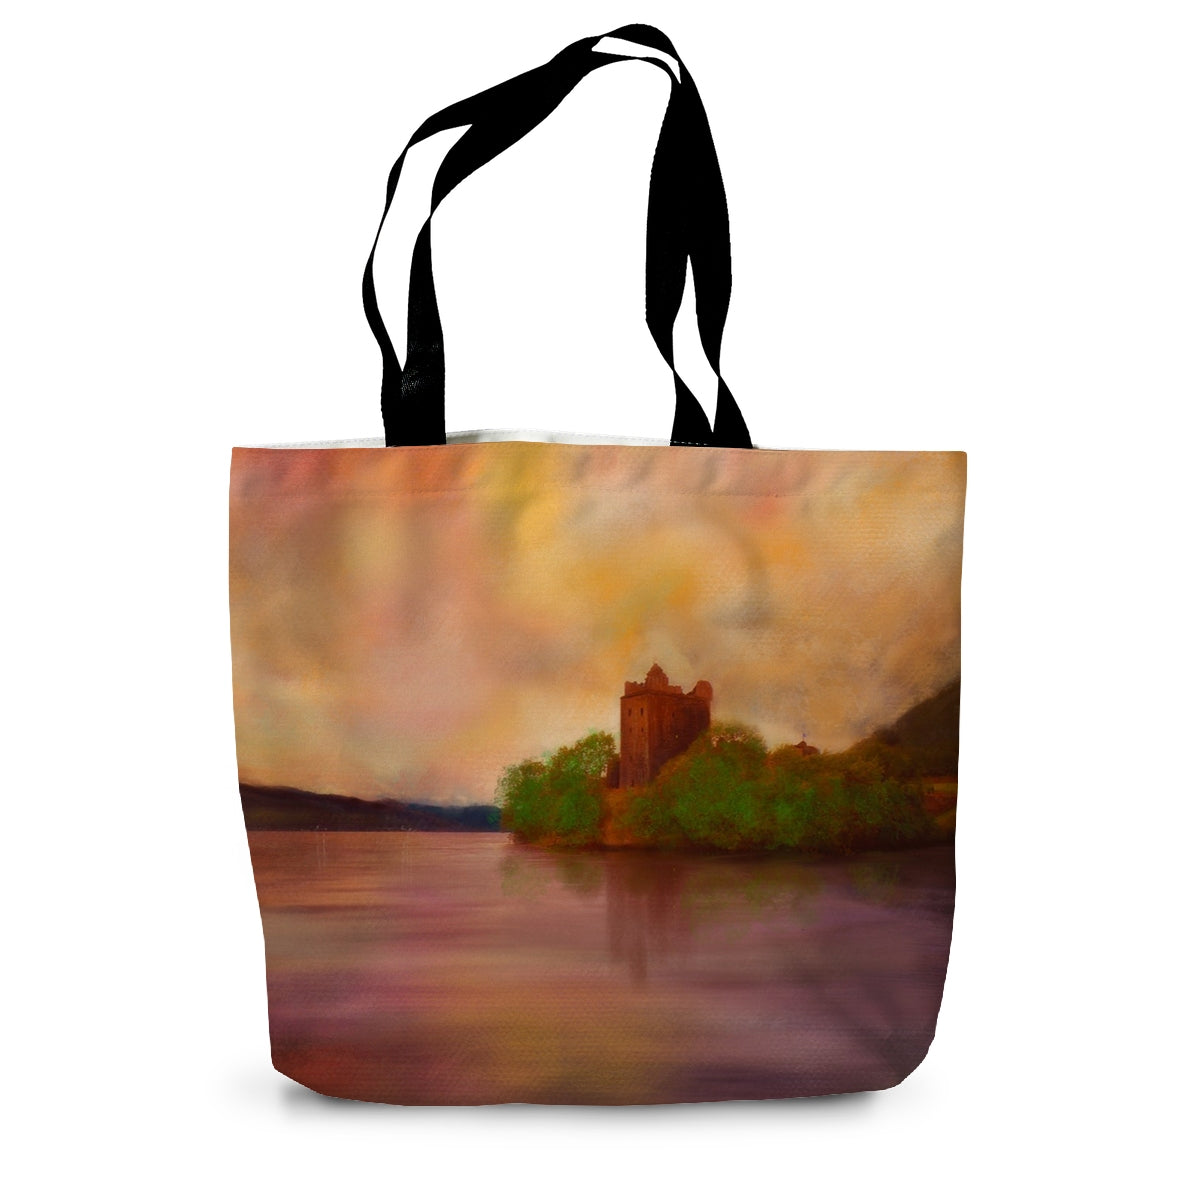 Urquhart Castle Art Gifts Canvas Tote Bag-Bags-Historic & Iconic Scotland Art Gallery-14"x18.5"-Paintings, Prints, Homeware, Art Gifts From Scotland By Scottish Artist Kevin Hunter